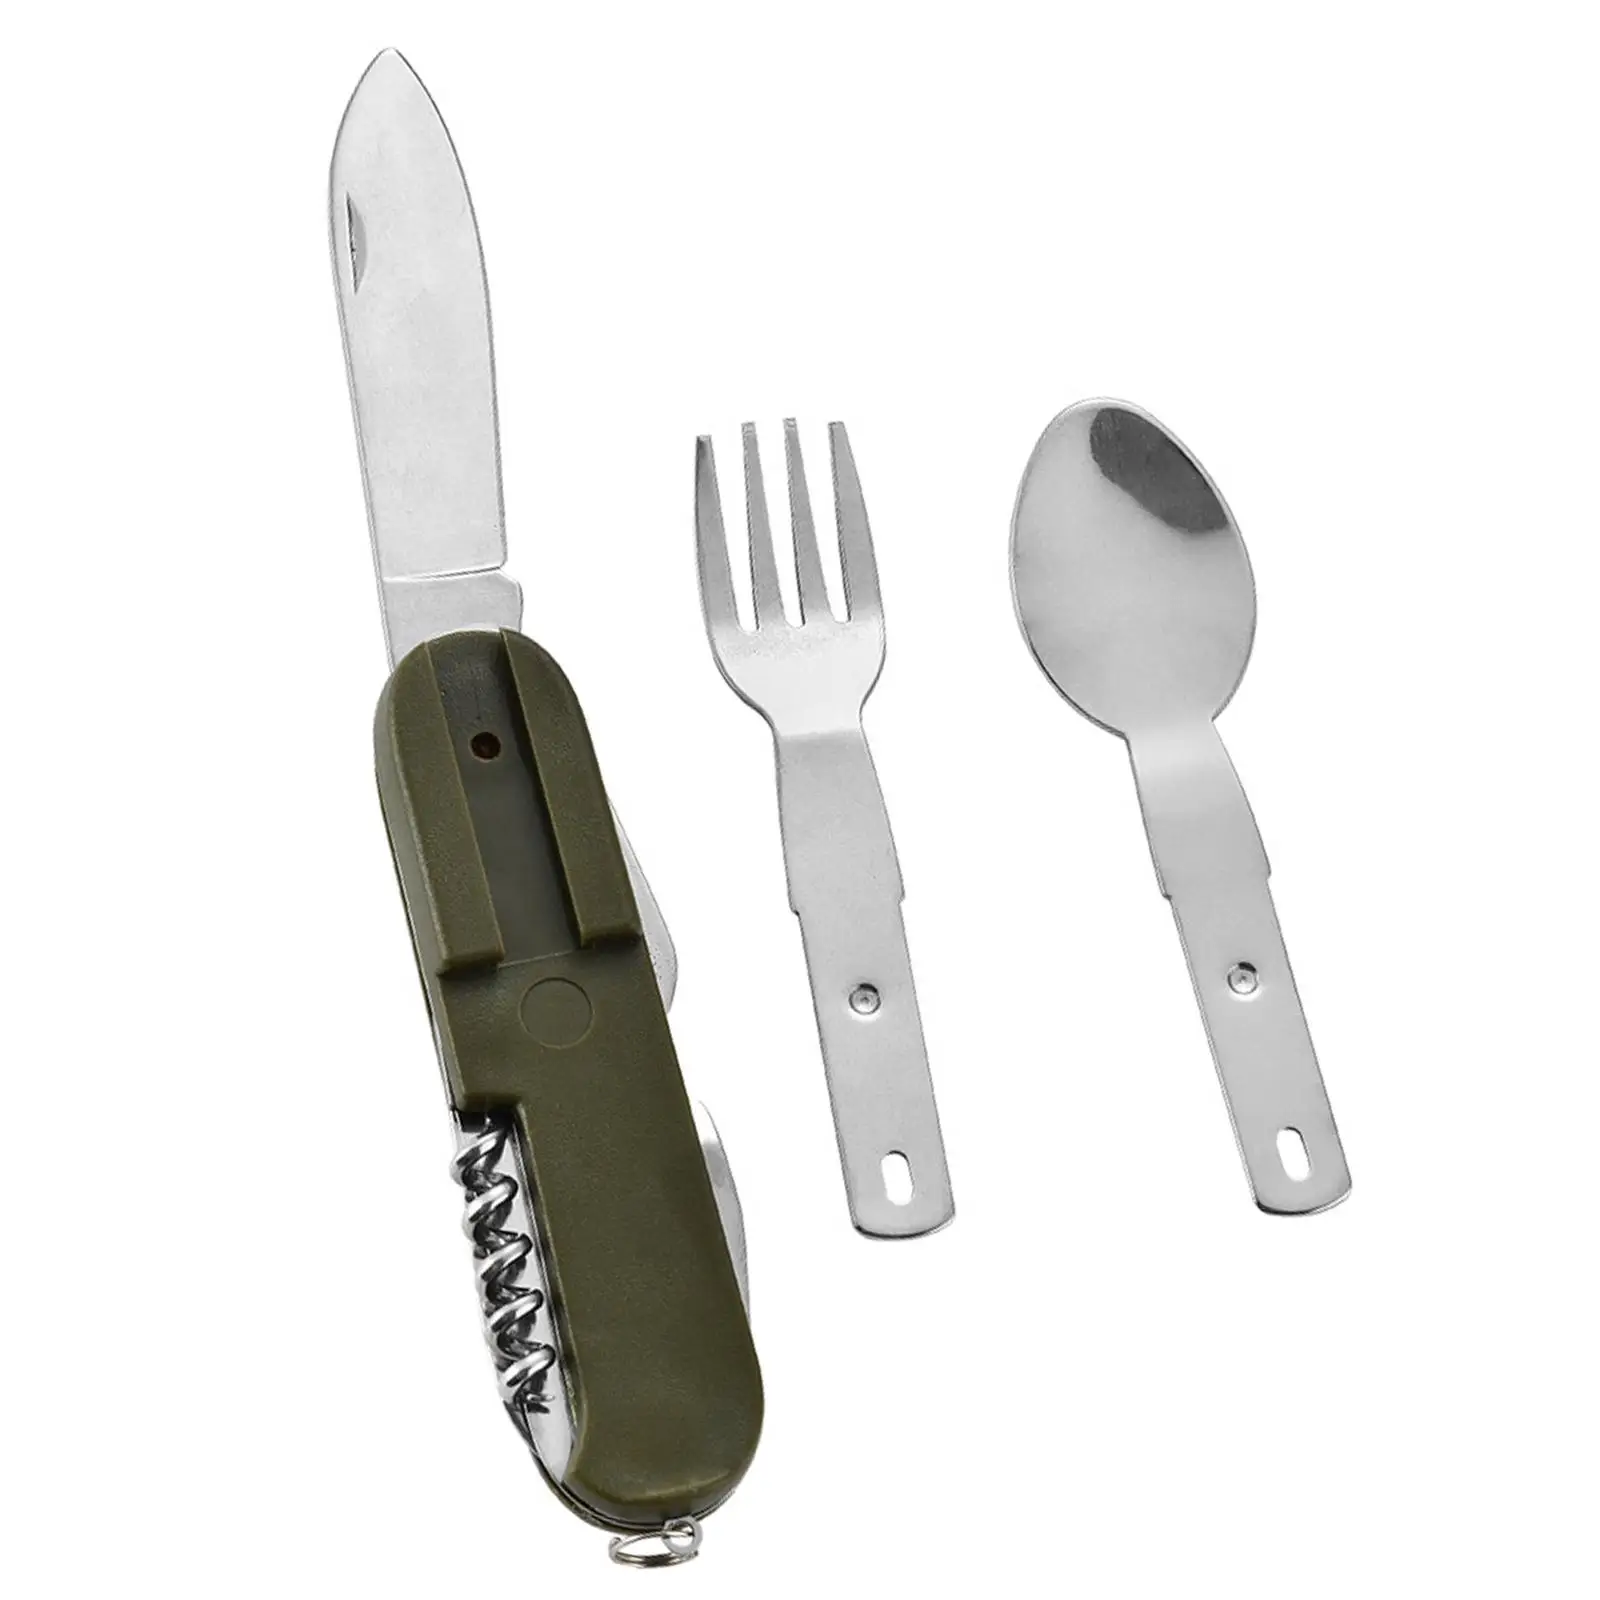 Camping Utensil Spoon, Fork, Knife & Bottle Opener Set Camping Cutlery Folding Tableware Compact Multi Tool for Hiking Traveling